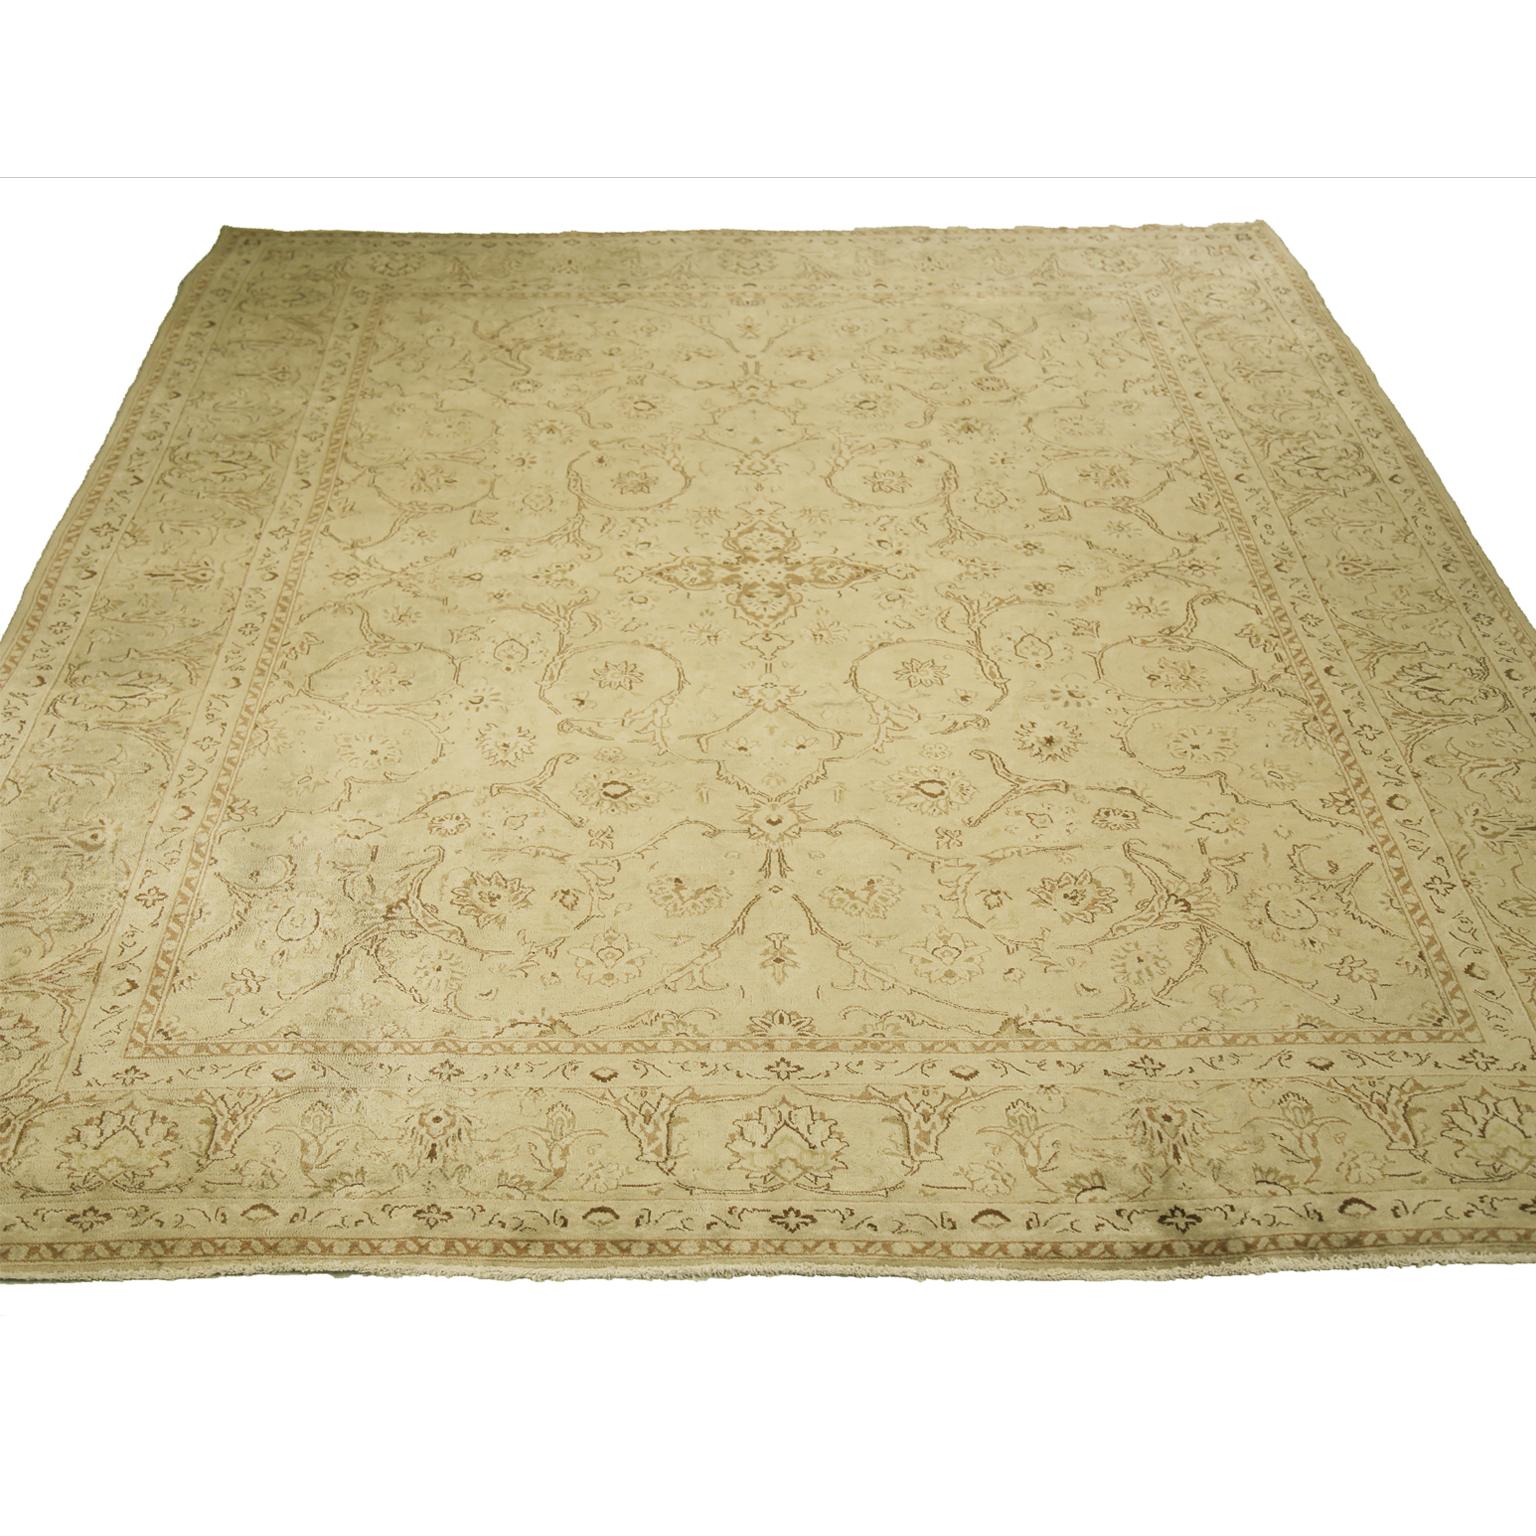 Antique Kerman Persian Rug with Floral Details in Ivory and Brown, circa 1960s For Sale 3